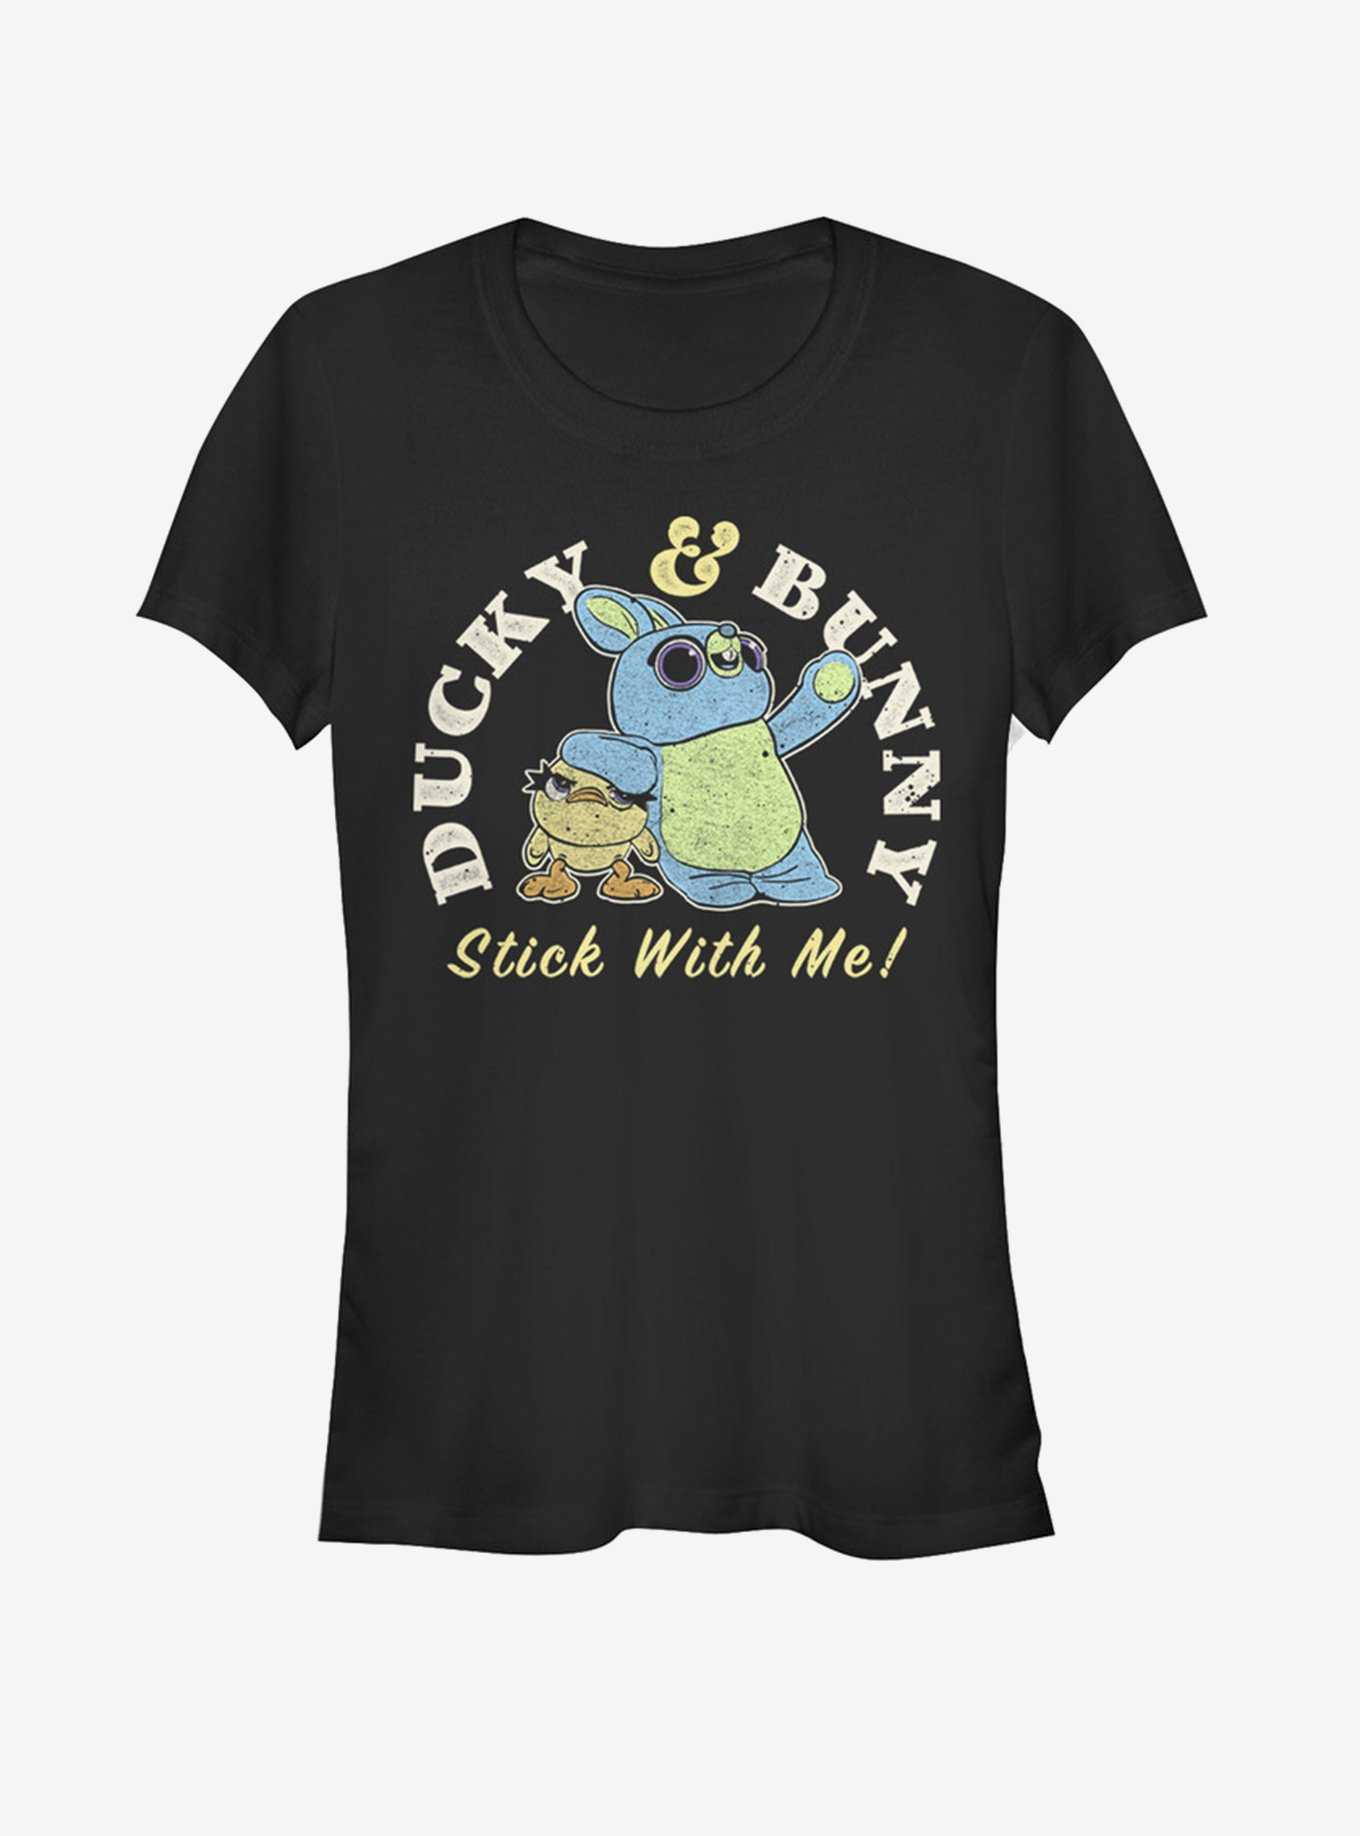 Disney Pixar Toy Story 4 Ducky And Bunny Brand Girls T-Shirt, , hi-res